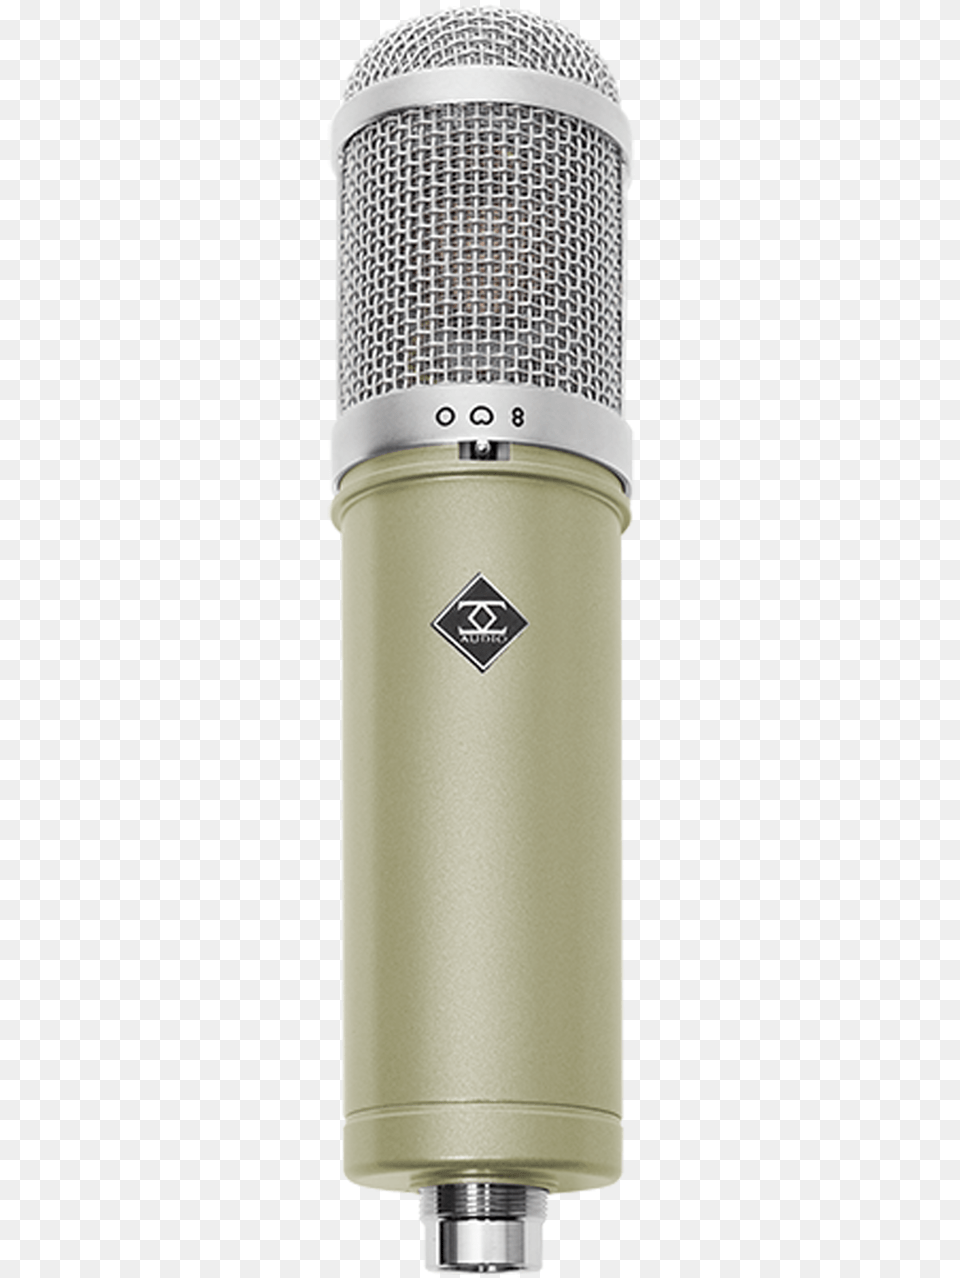 Microphone, Electrical Device Png Image